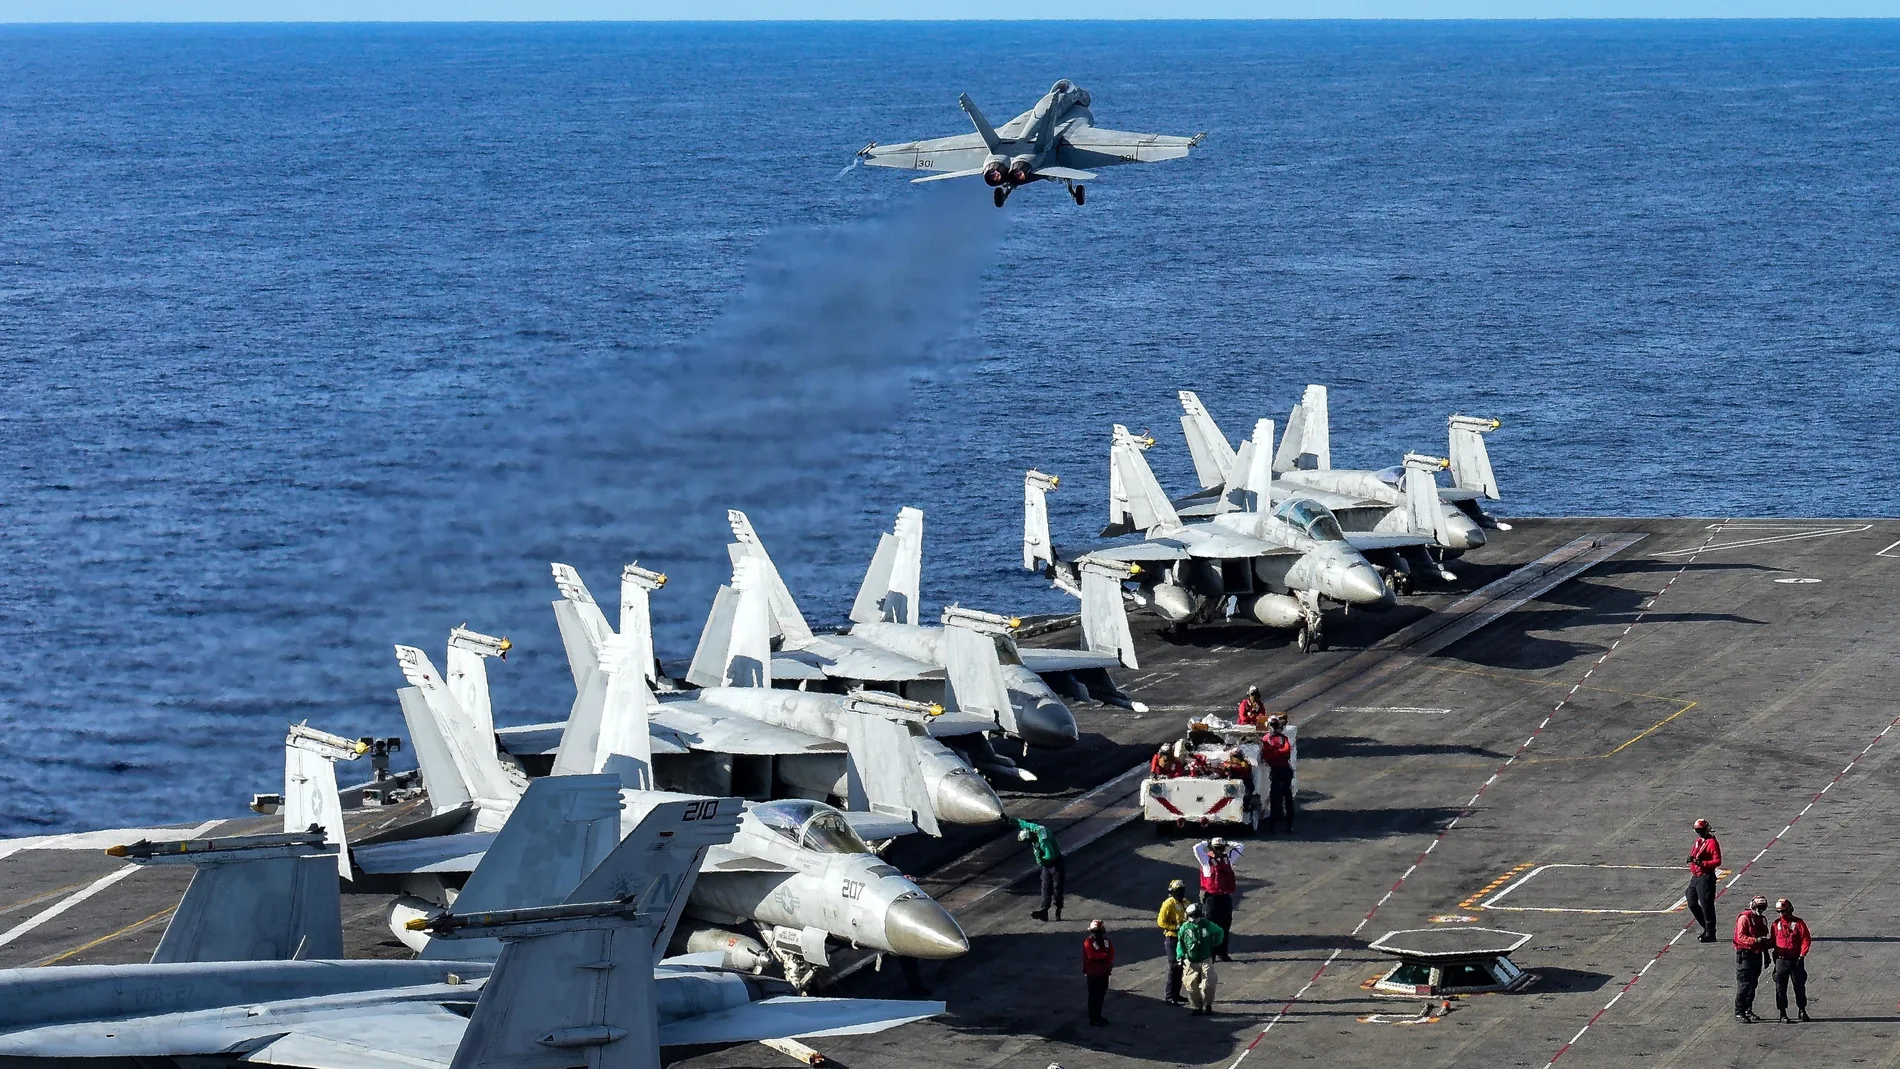 US Carrier Strike Group 5 conducts operations in the South China Sea